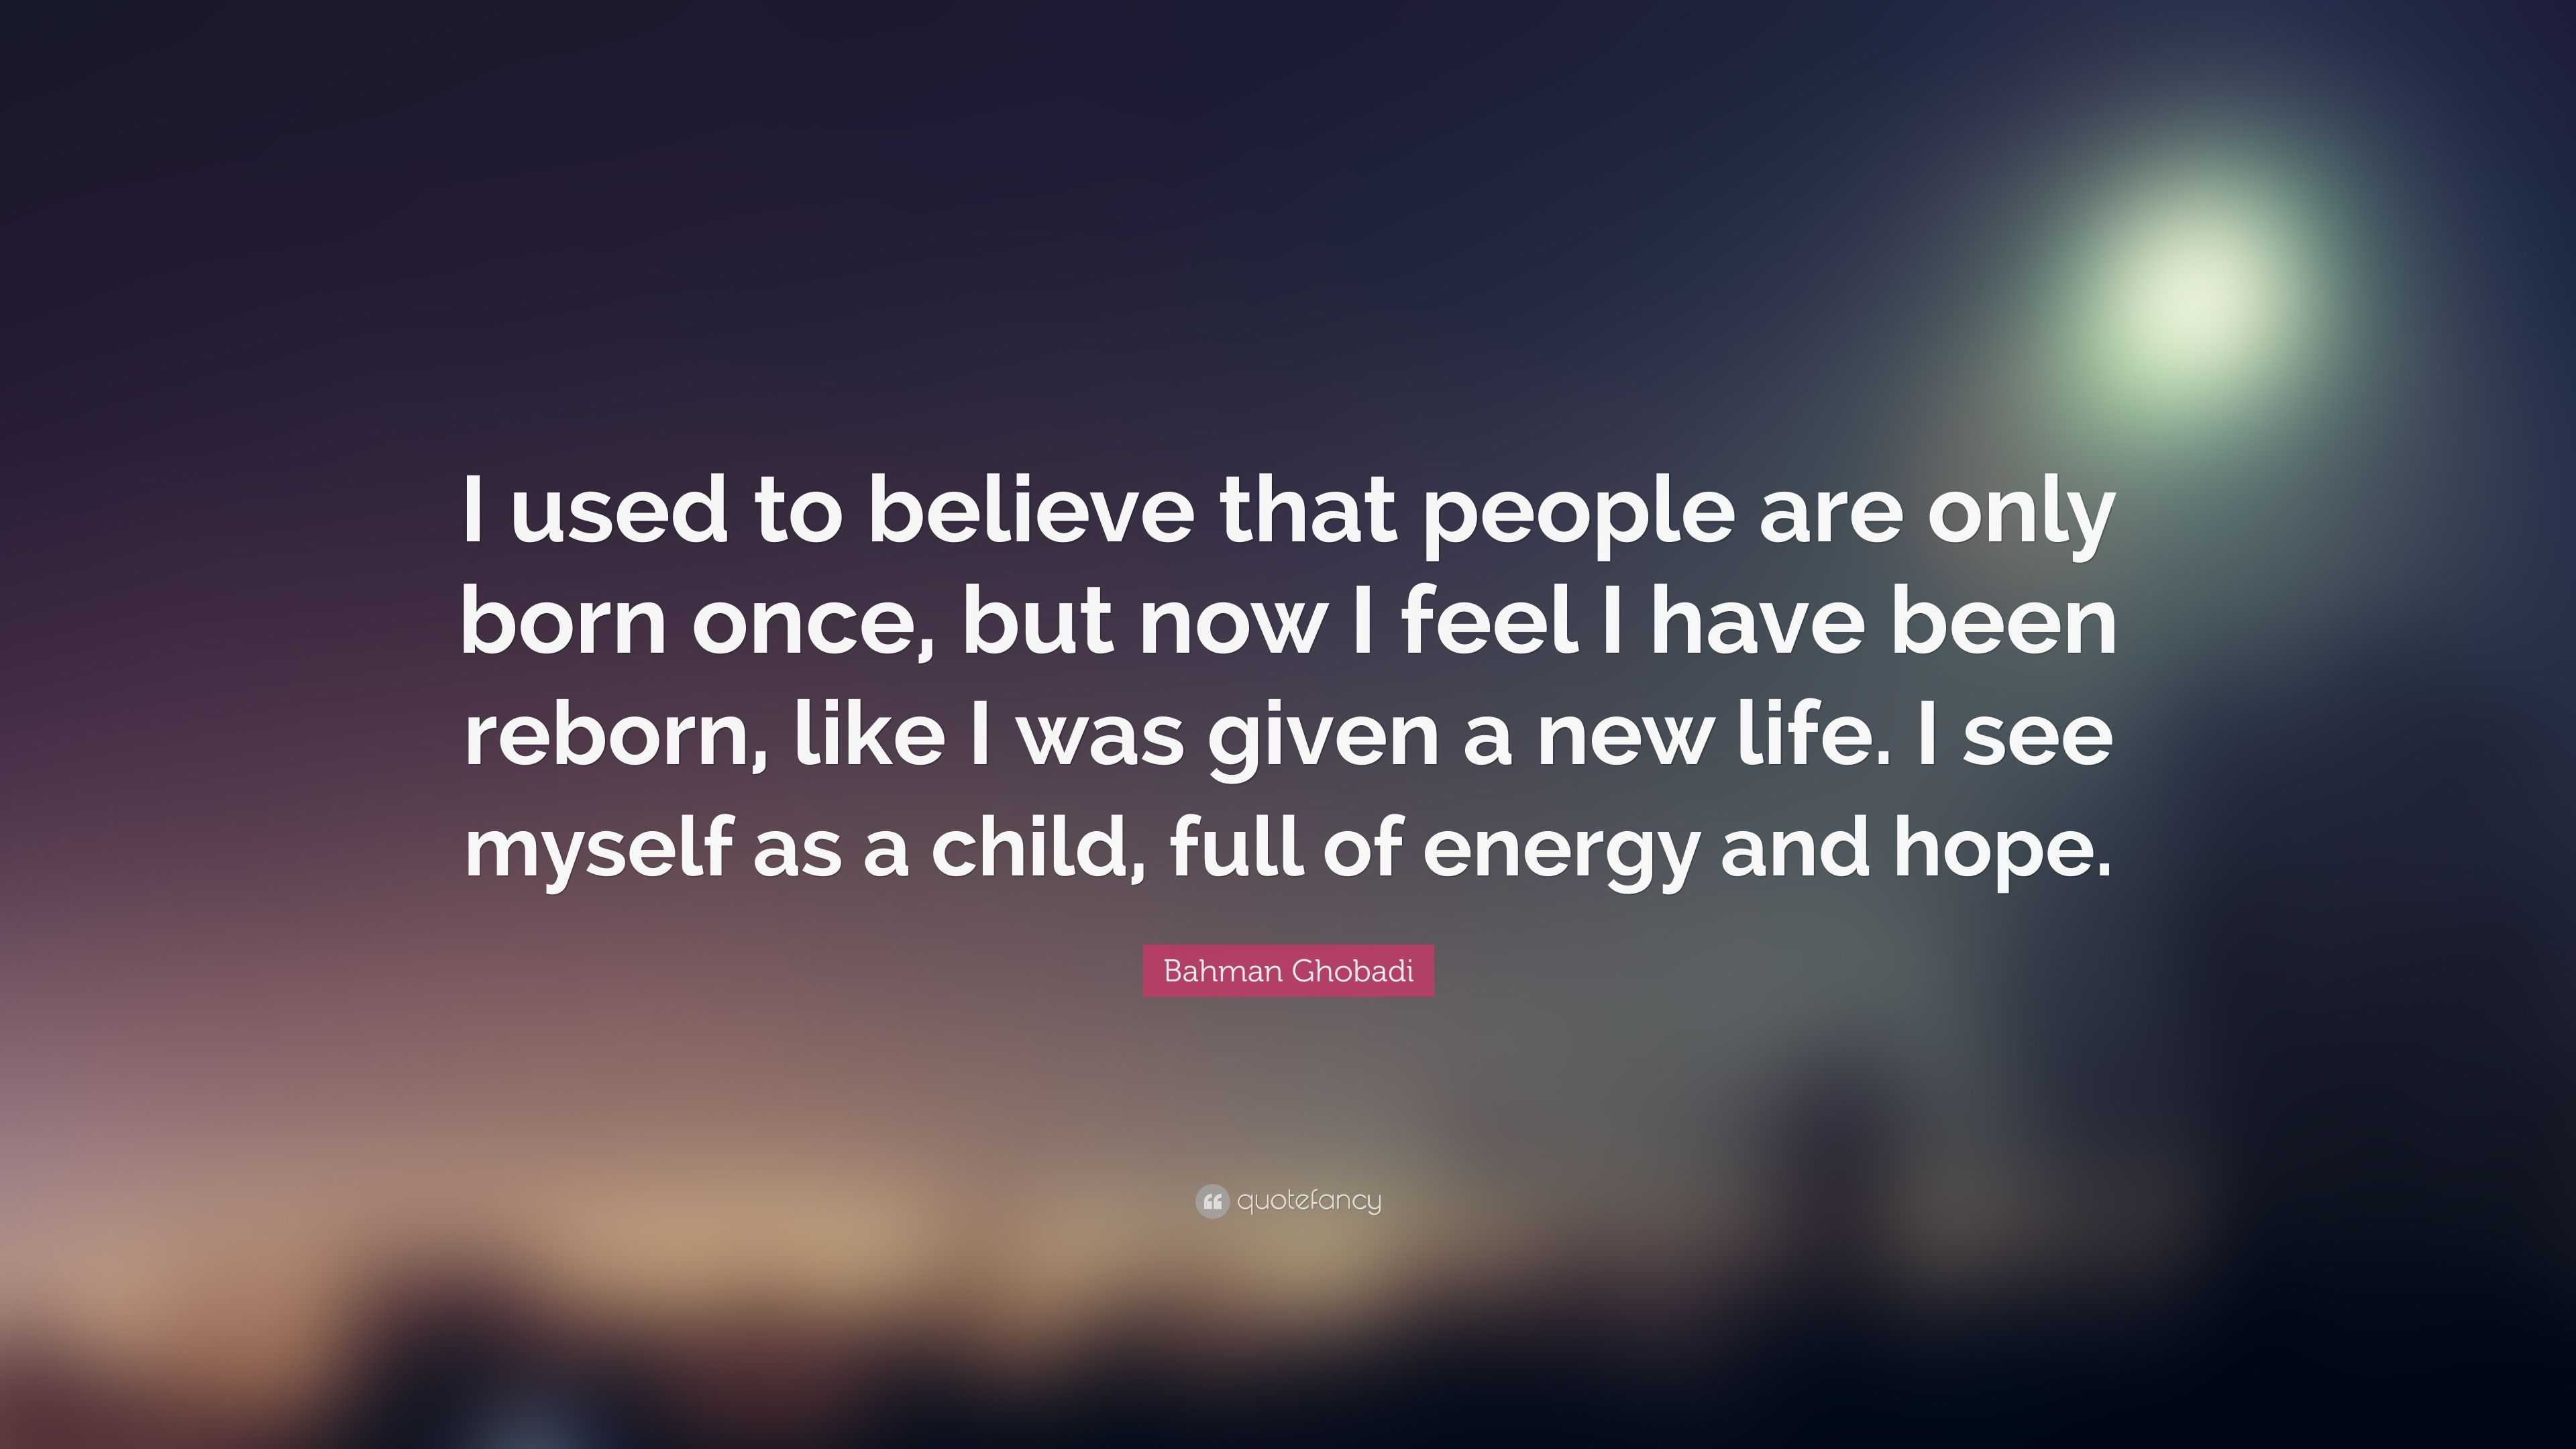 Bahman Ghobadi Quote: “I used to believe that people are only born